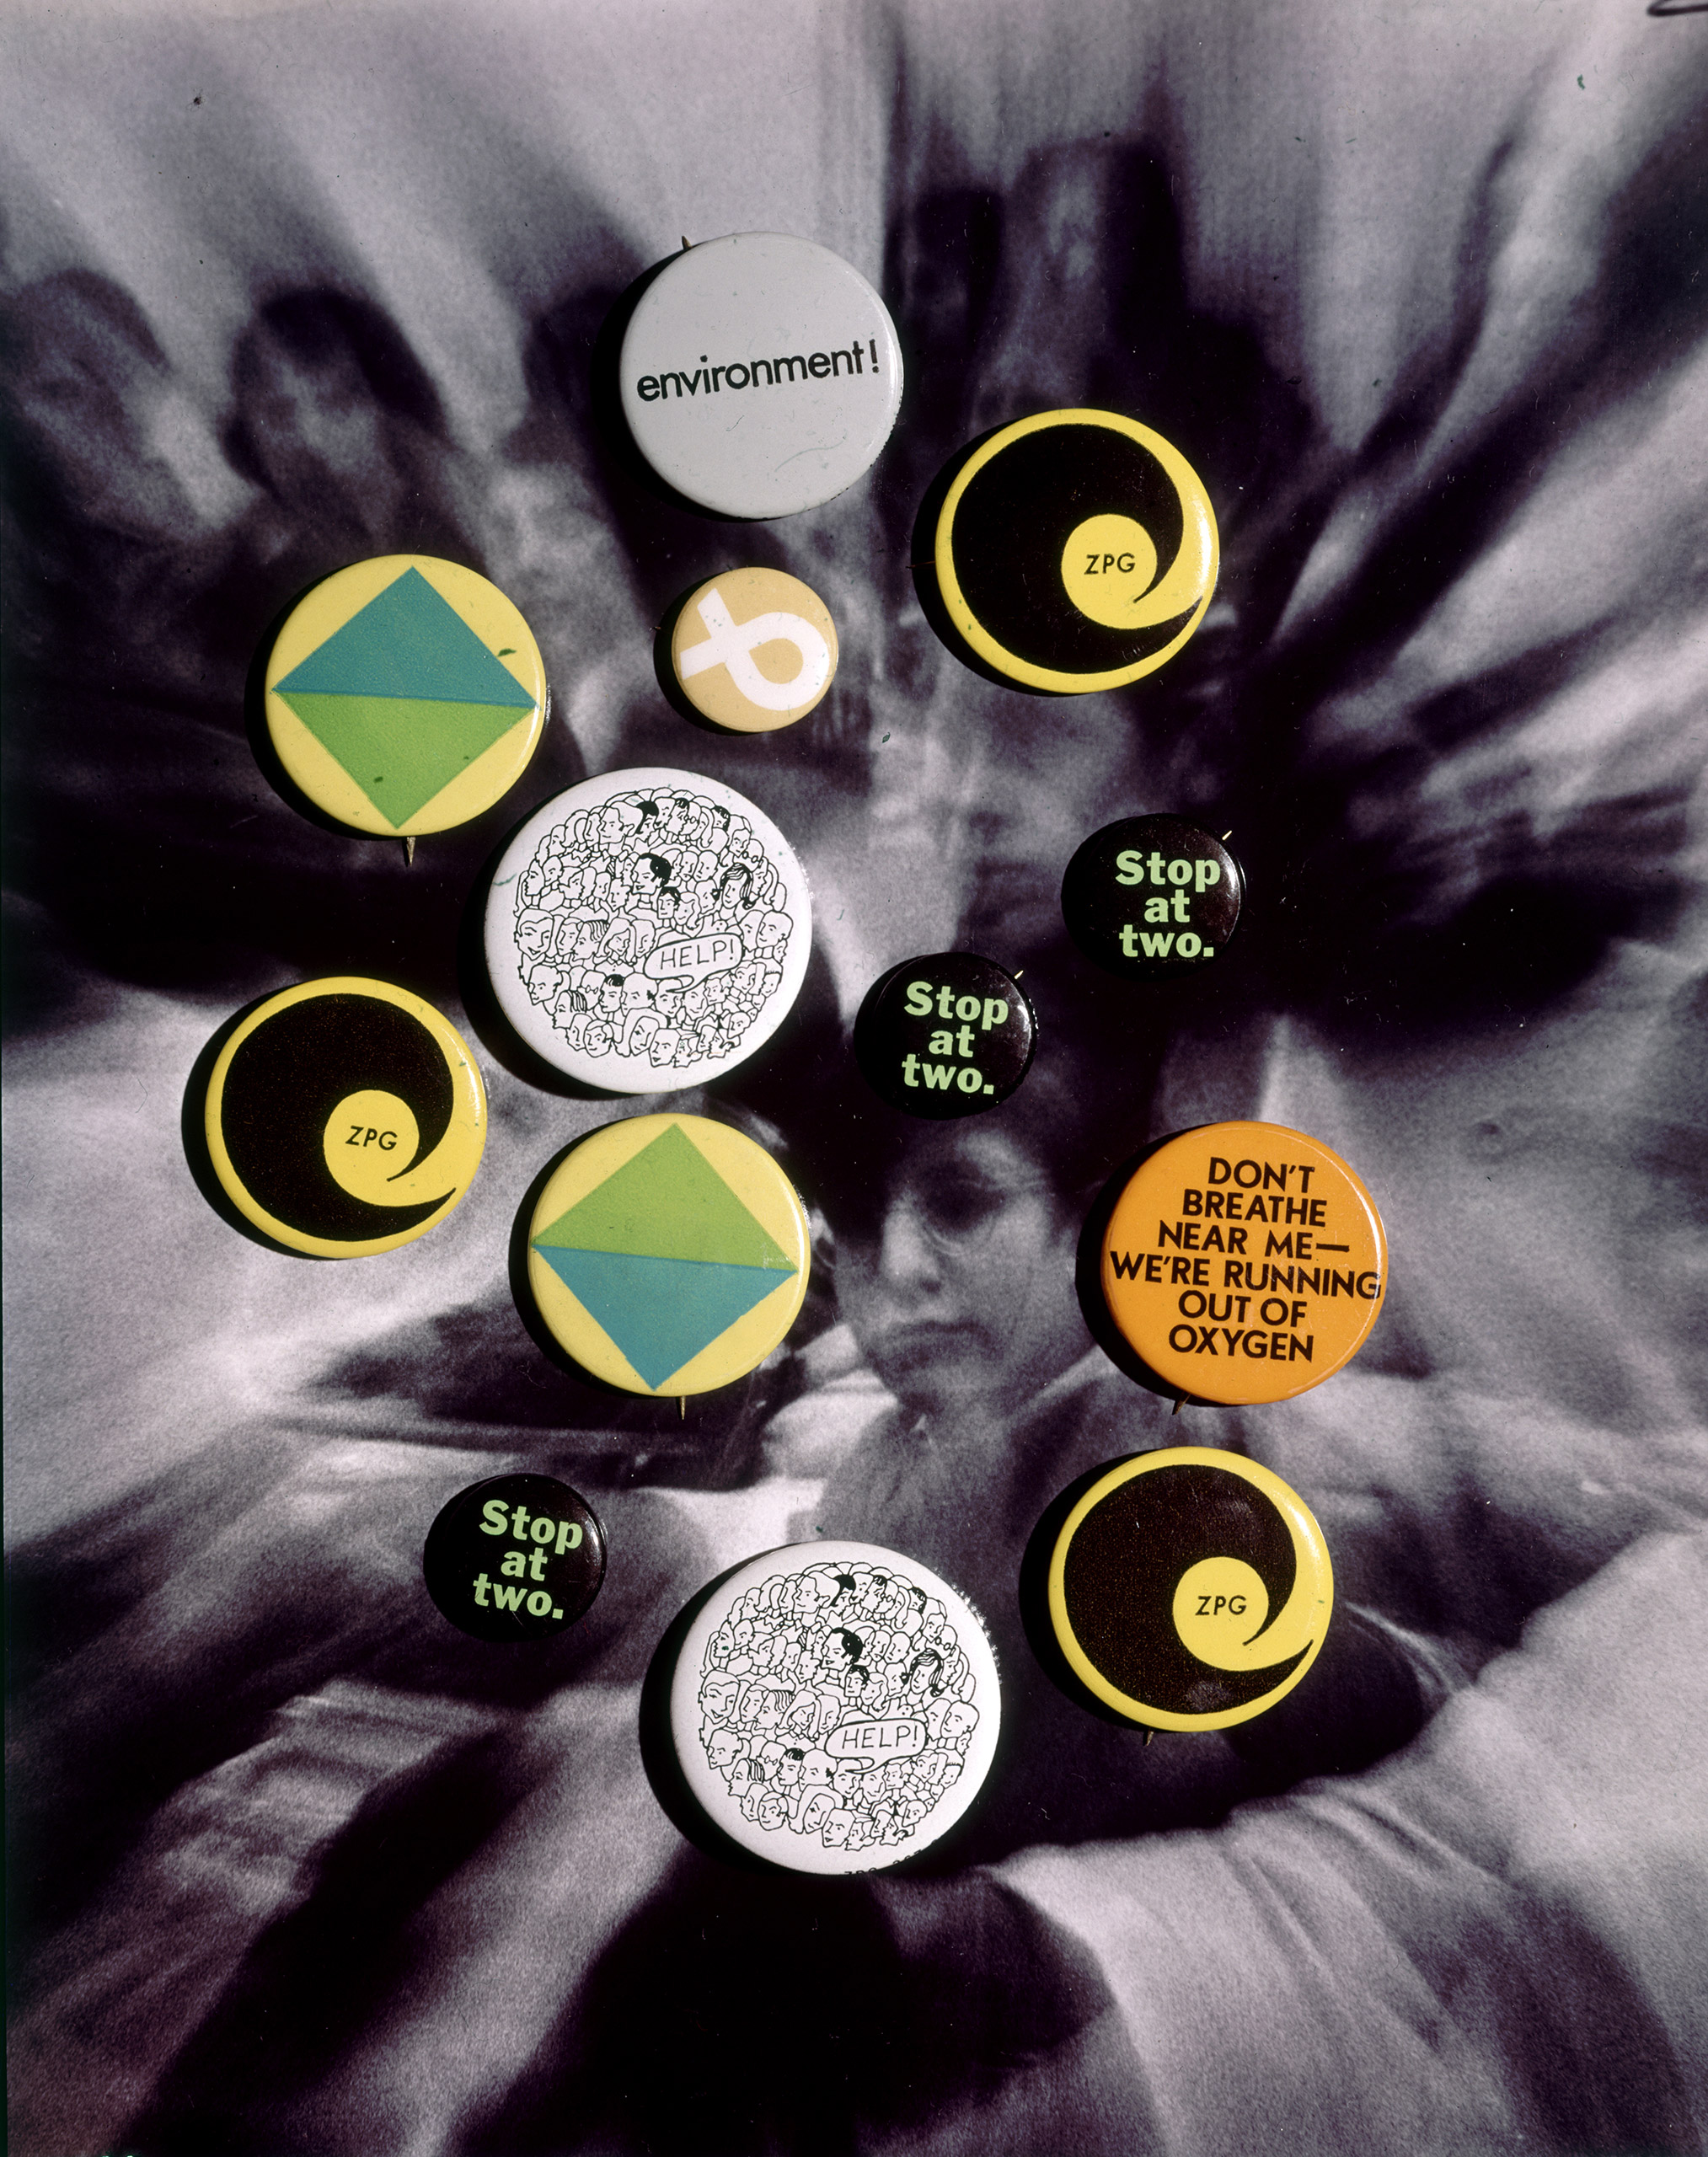 Ecology and population control buttons from the Zero Population Growth movement at Ithaca College NY 1970.